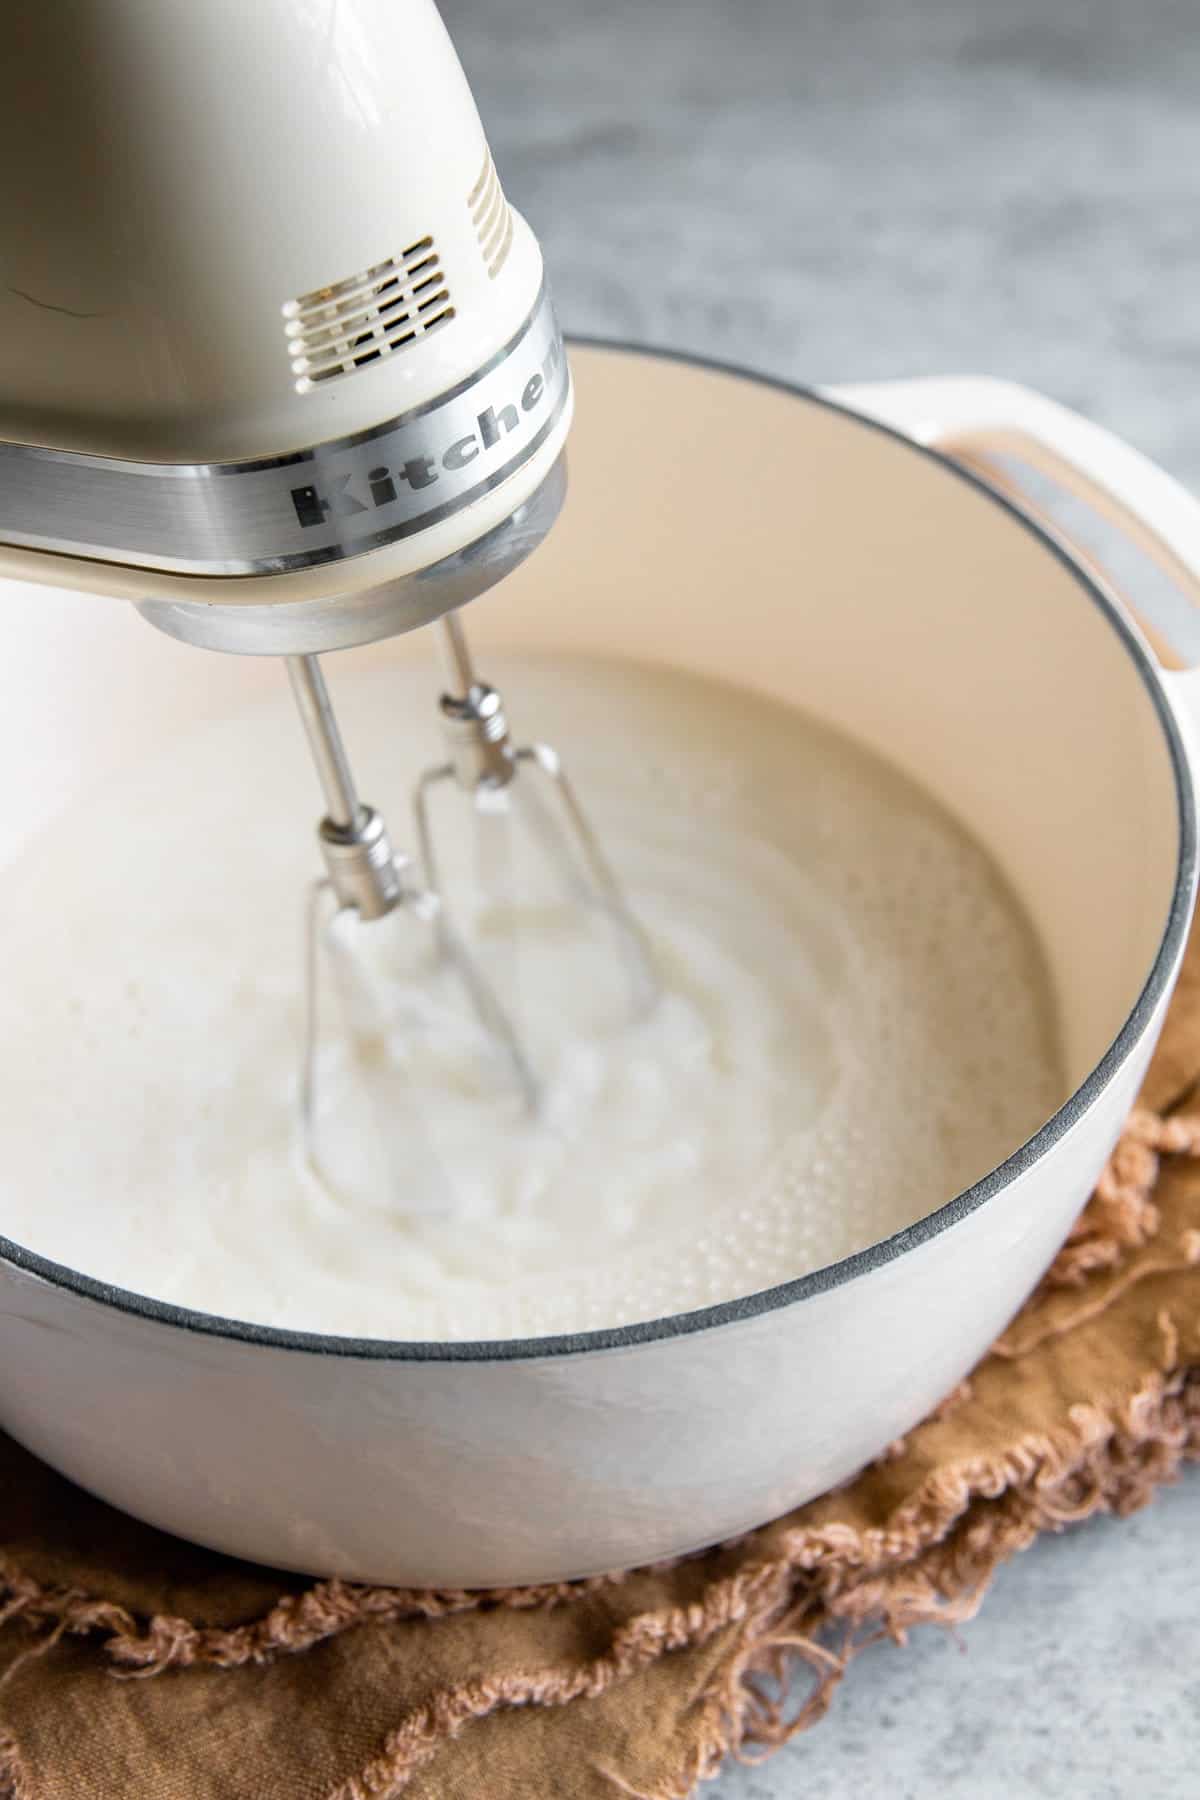 Combine ingredients and mix with a hand mixer